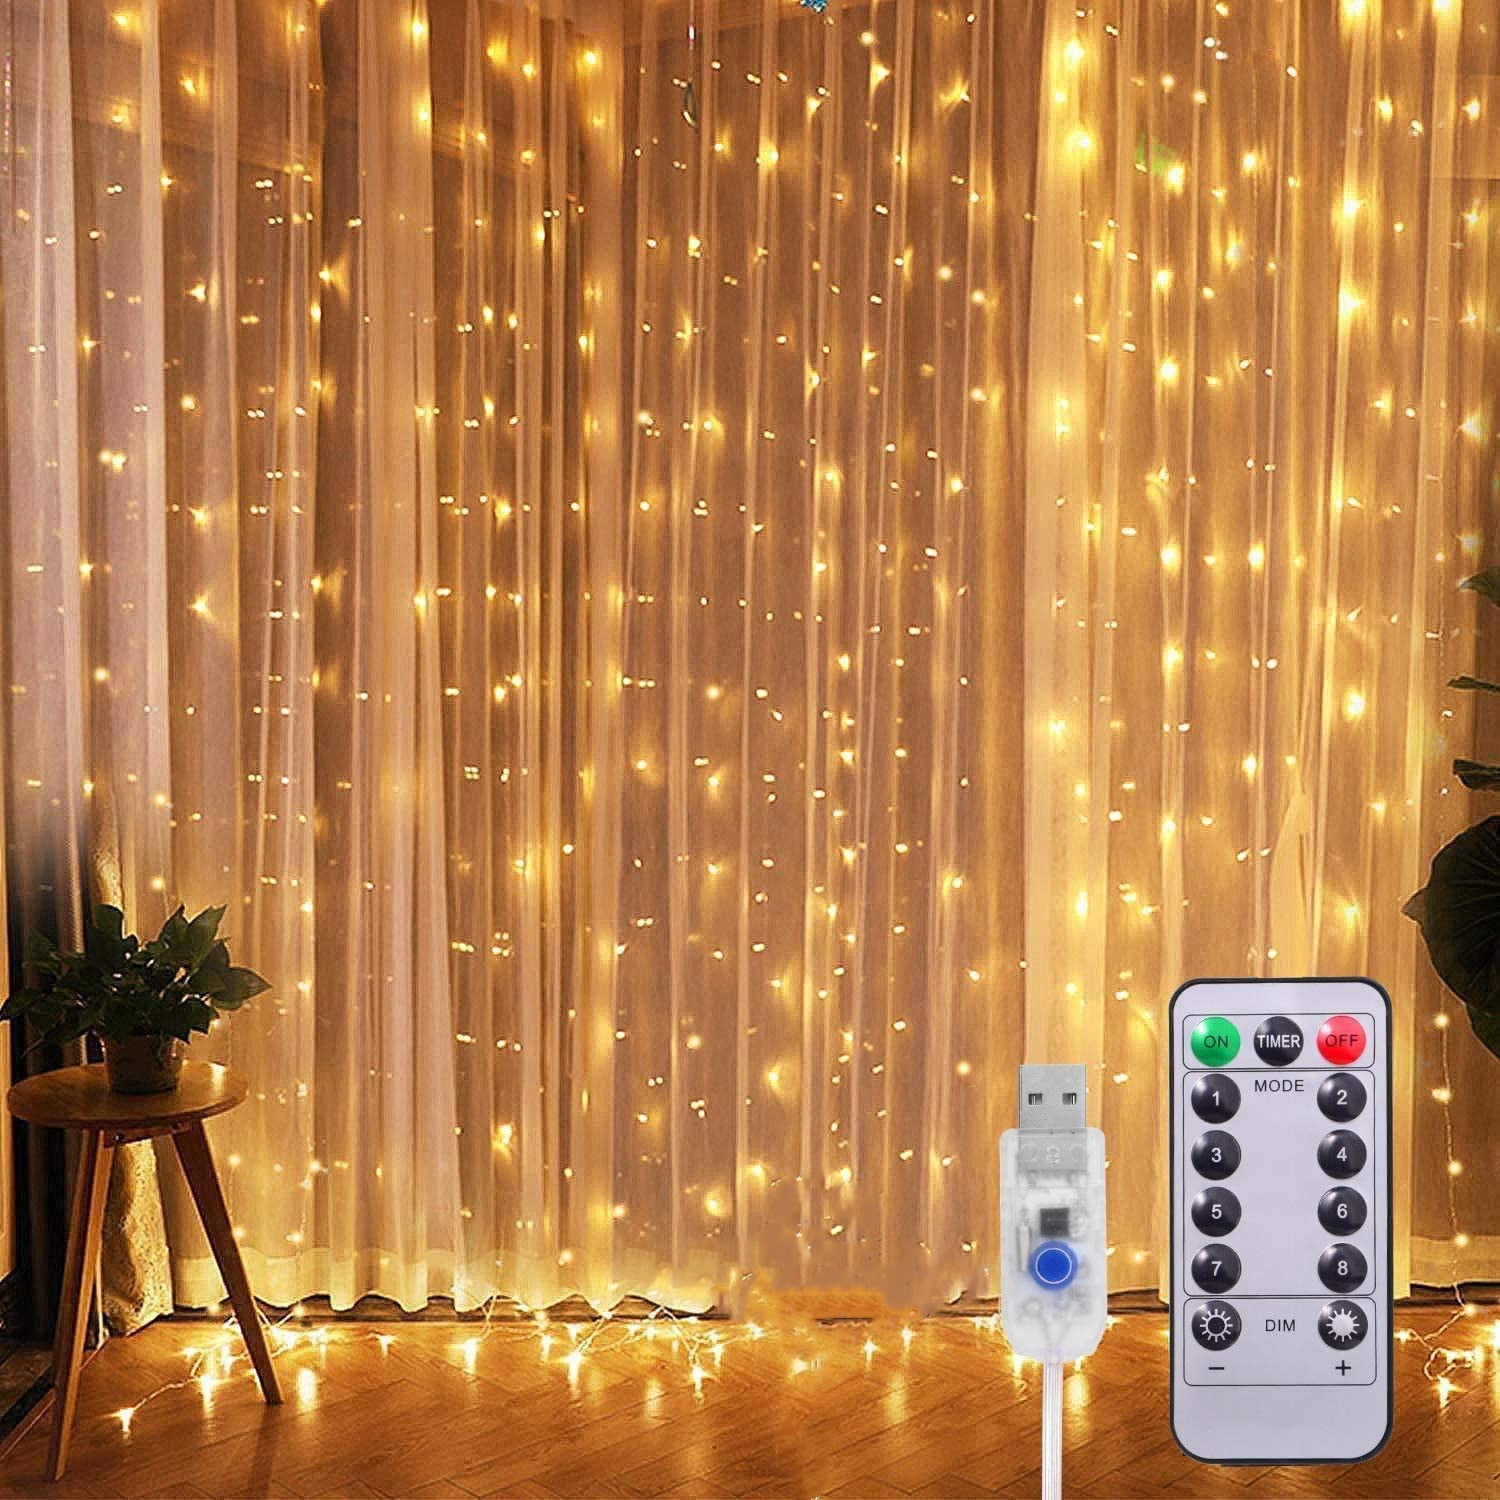 Outdoor Garden LED Lights String Fairy Curtain Battery & USB Waterproof Remote 